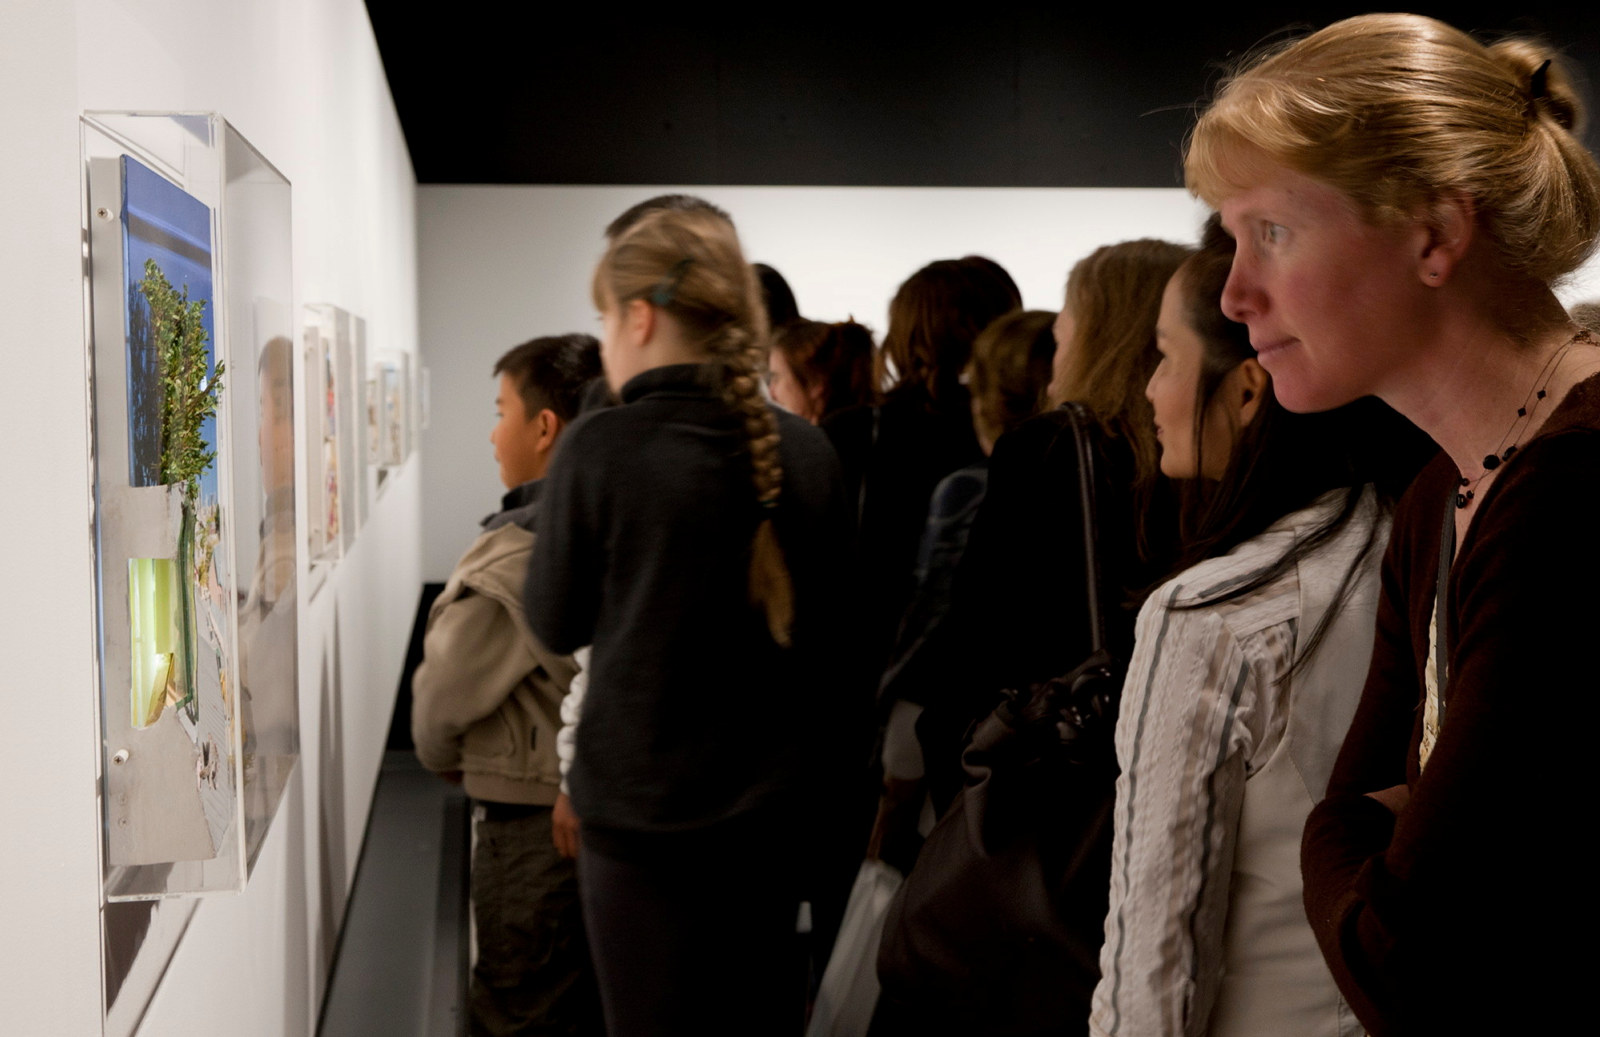 Guests viewing artwork in exhibition space